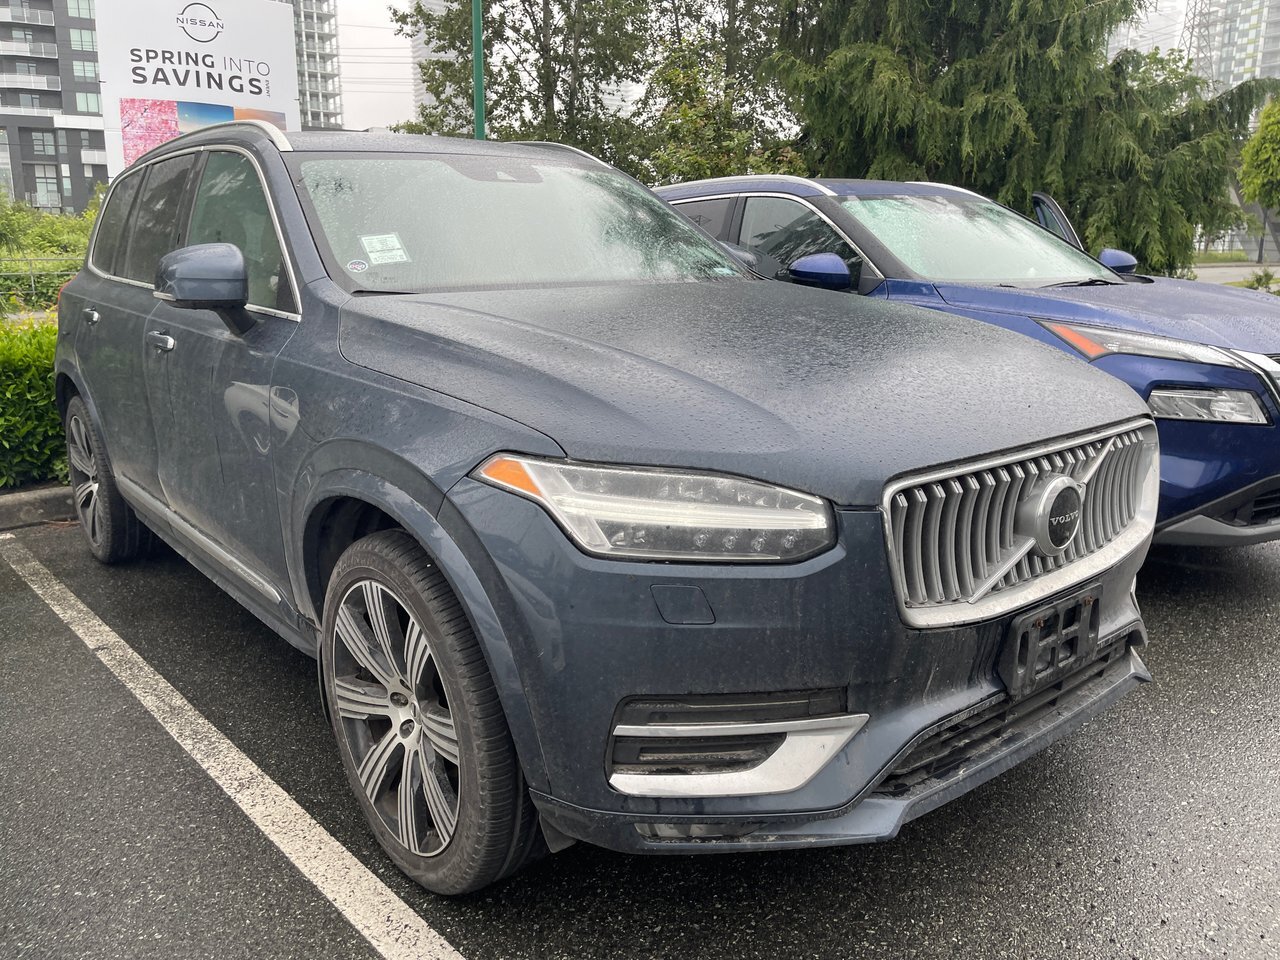 2020 Volvo XC90 INSCRIPTION - JUST LANDED! CERTIFIED BY VOLVO VEHI